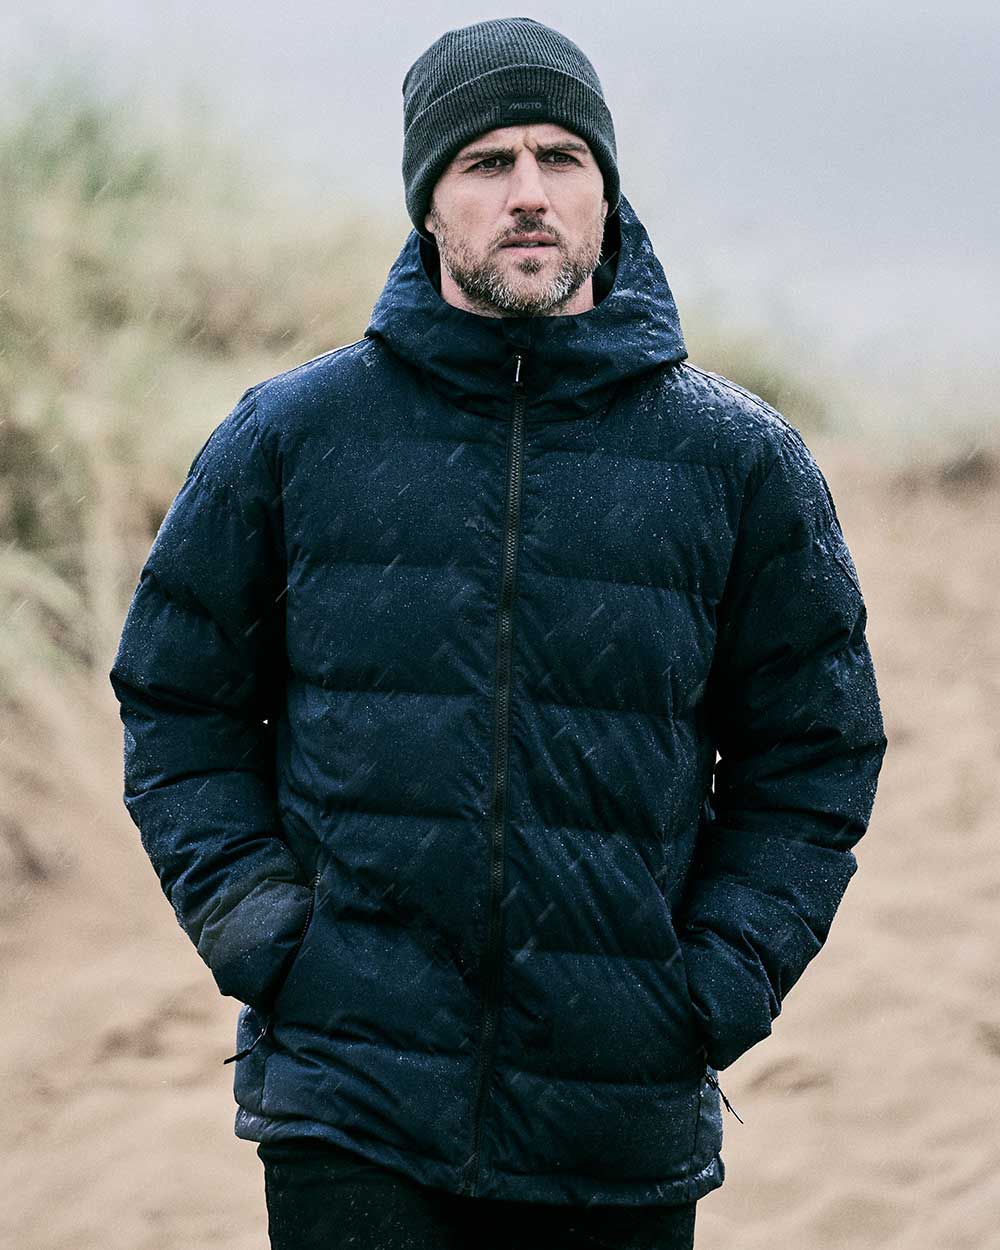 Musto Mens Marina Quilted Jacket 2.0 in Navy 